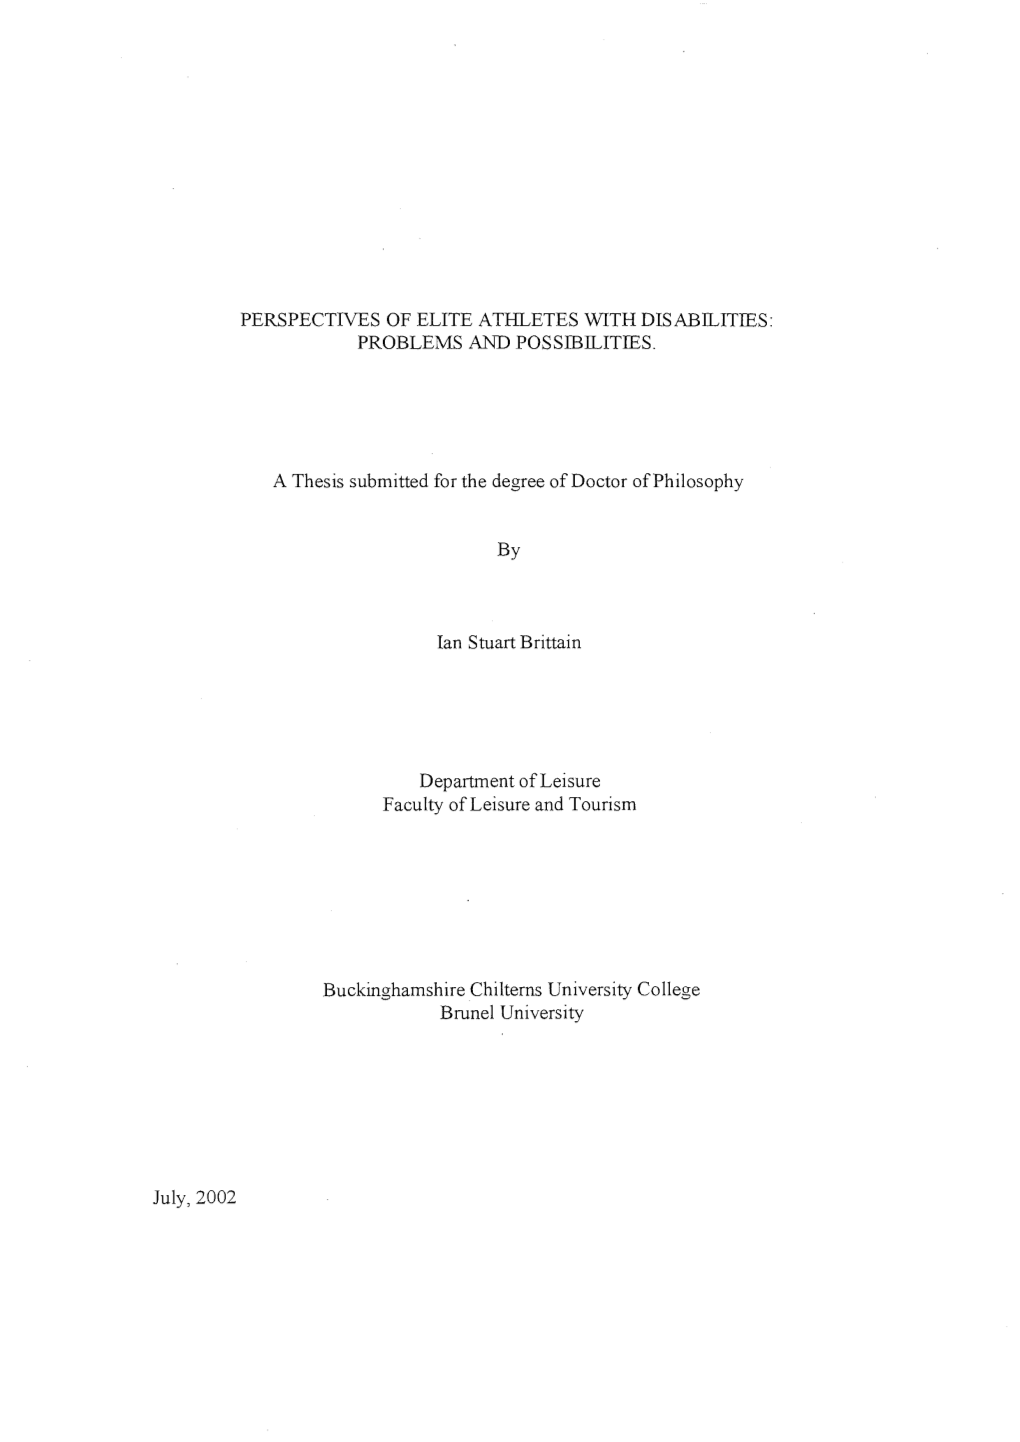 July, 2002 PERSPECTIVES of ELITE ATHLETES with Disabllities: PROBLEMS and Possibllities. a Thesis Submitted for the Degree of Do